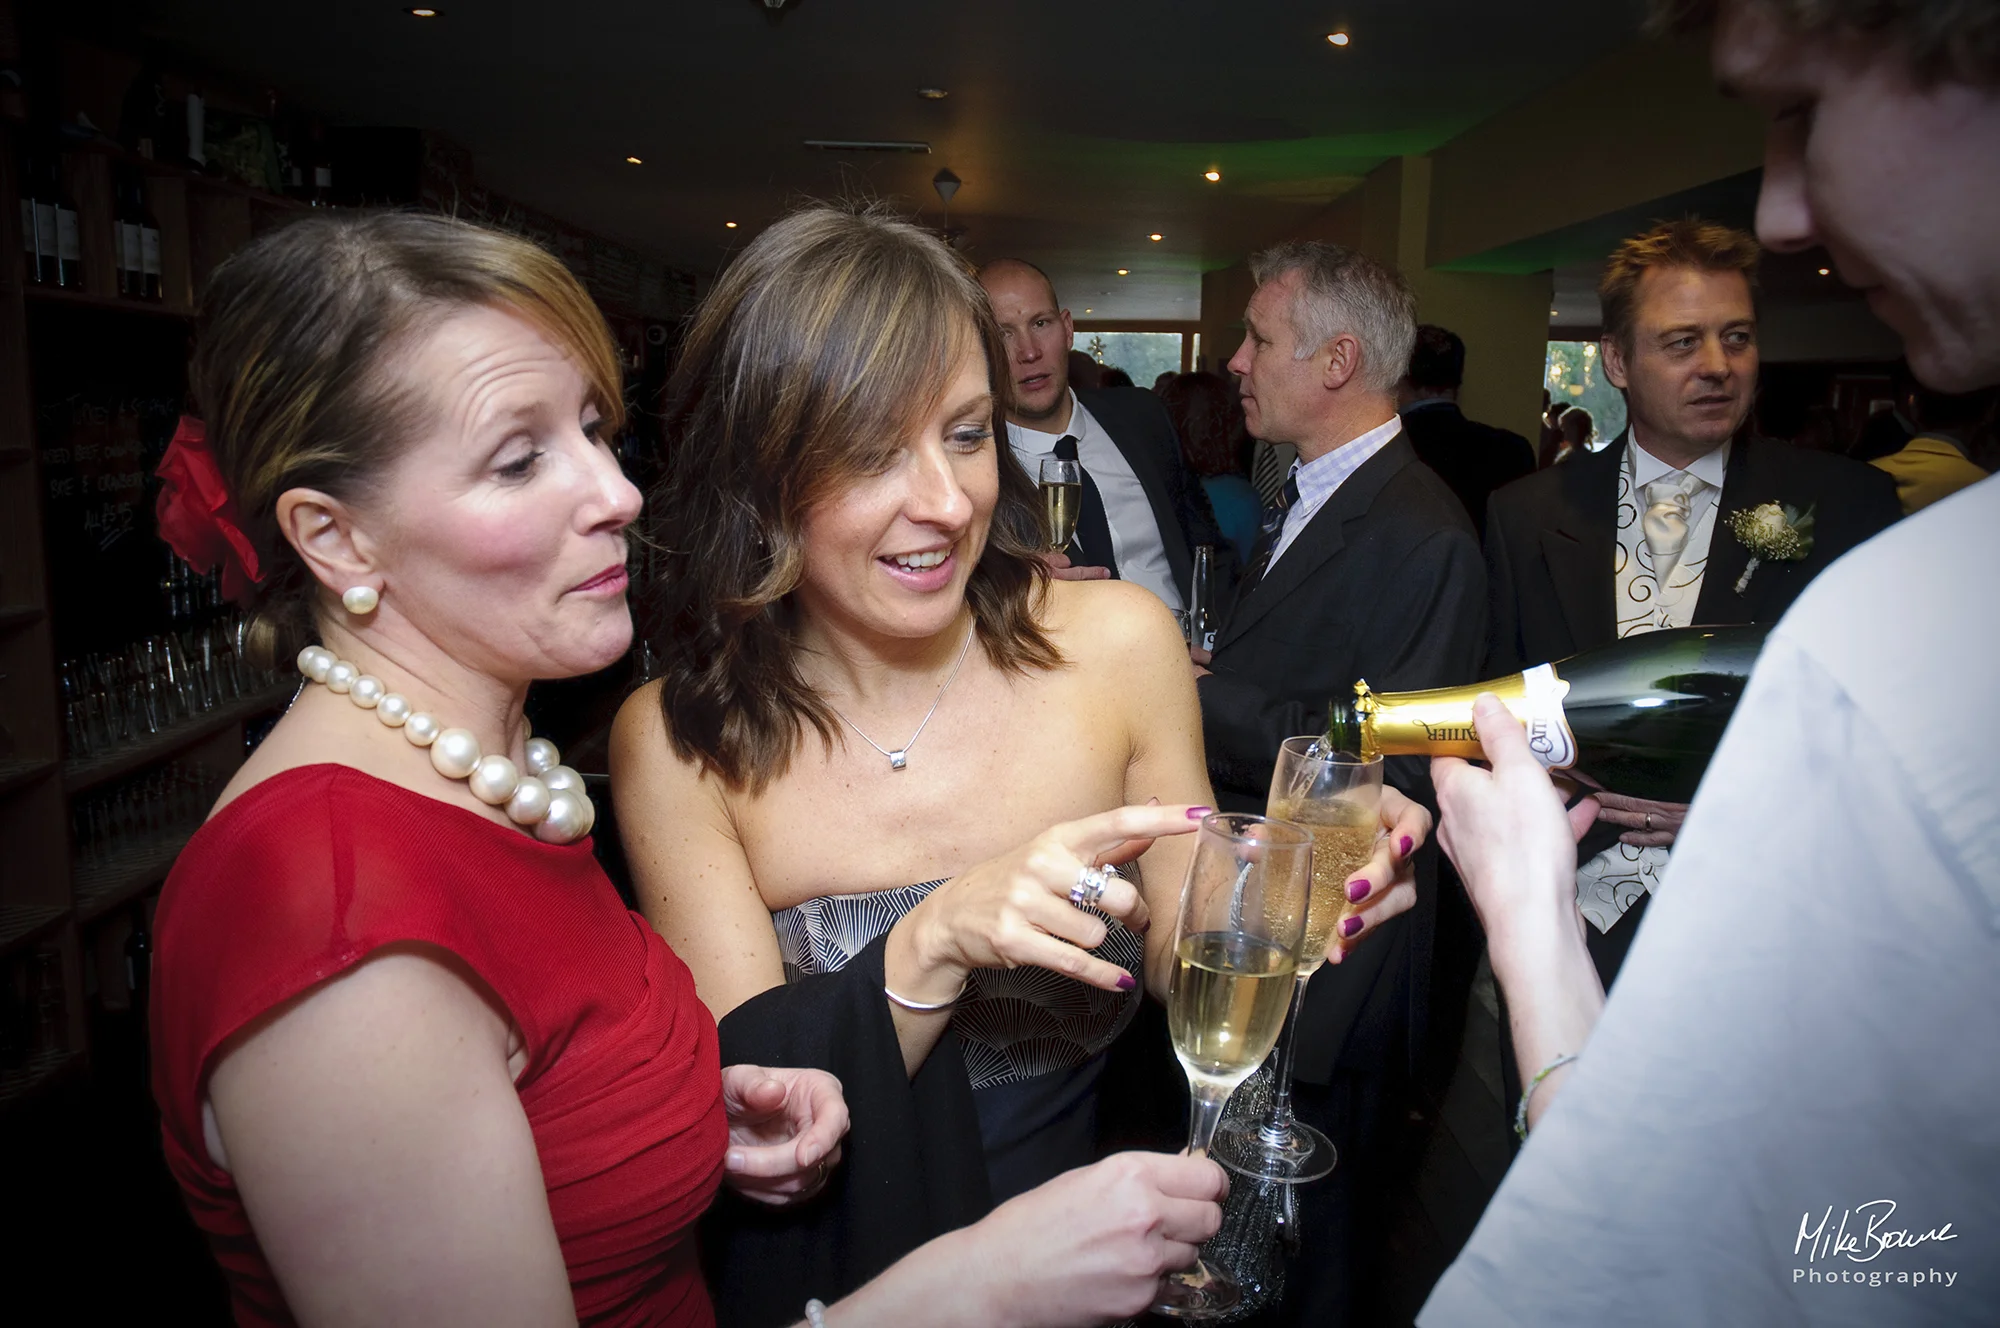 Two female wedding guests having their glasses refilled with Champaign at a reception